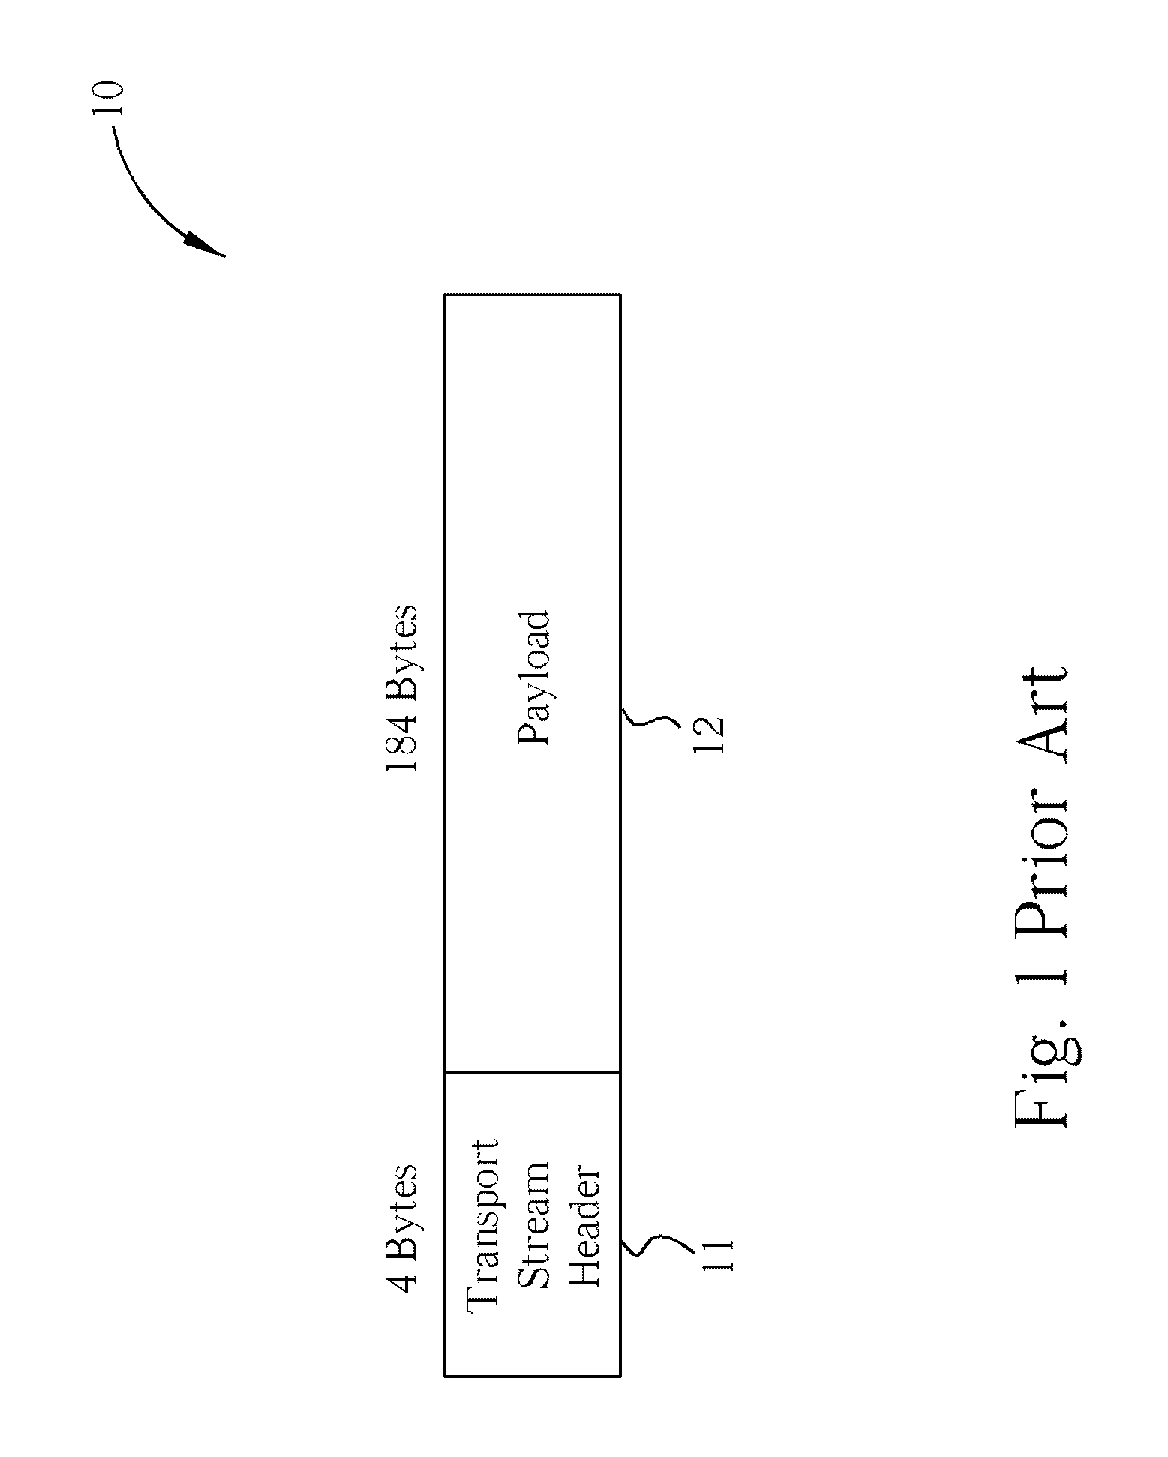 System and method for extracting and routing audio-visual programs from transport stream packets